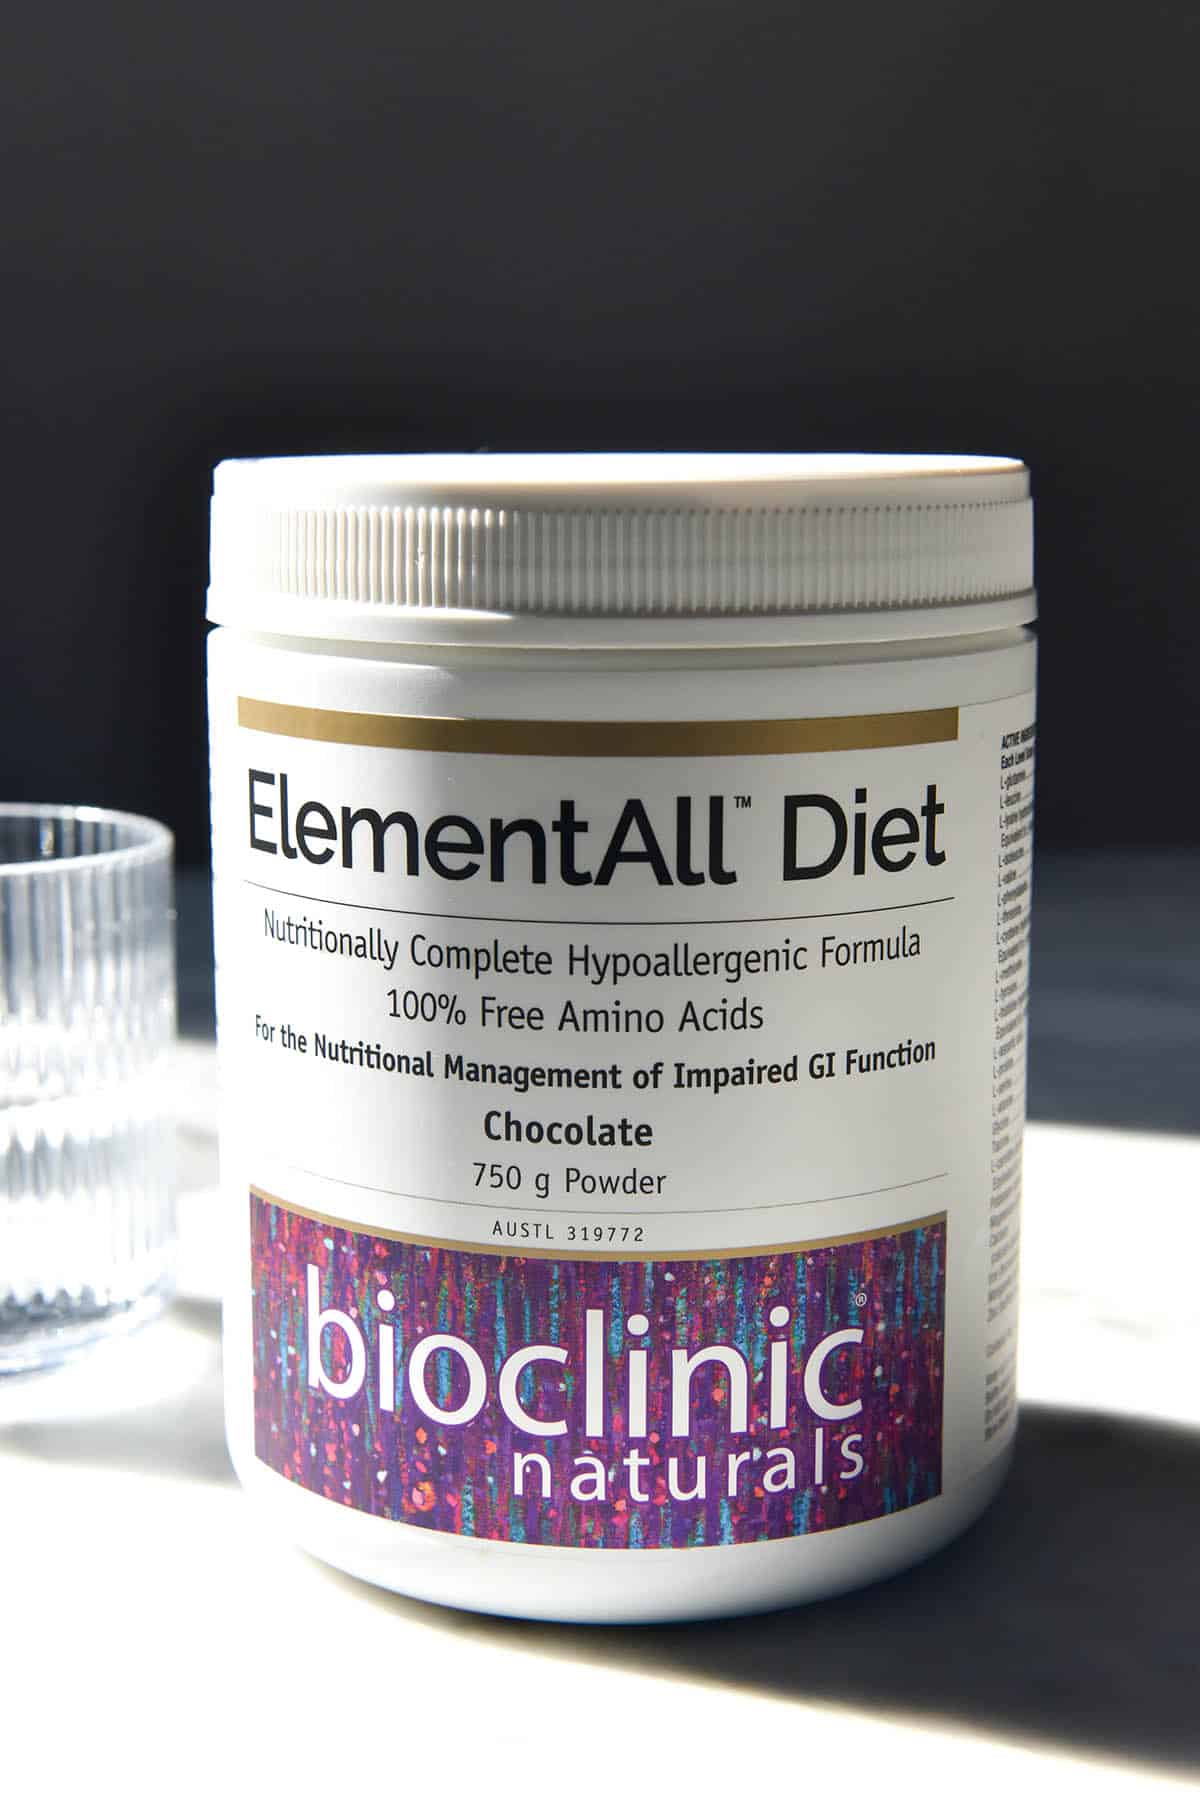 A side on view of a container of Elementall brand elemental diet nutritional formula